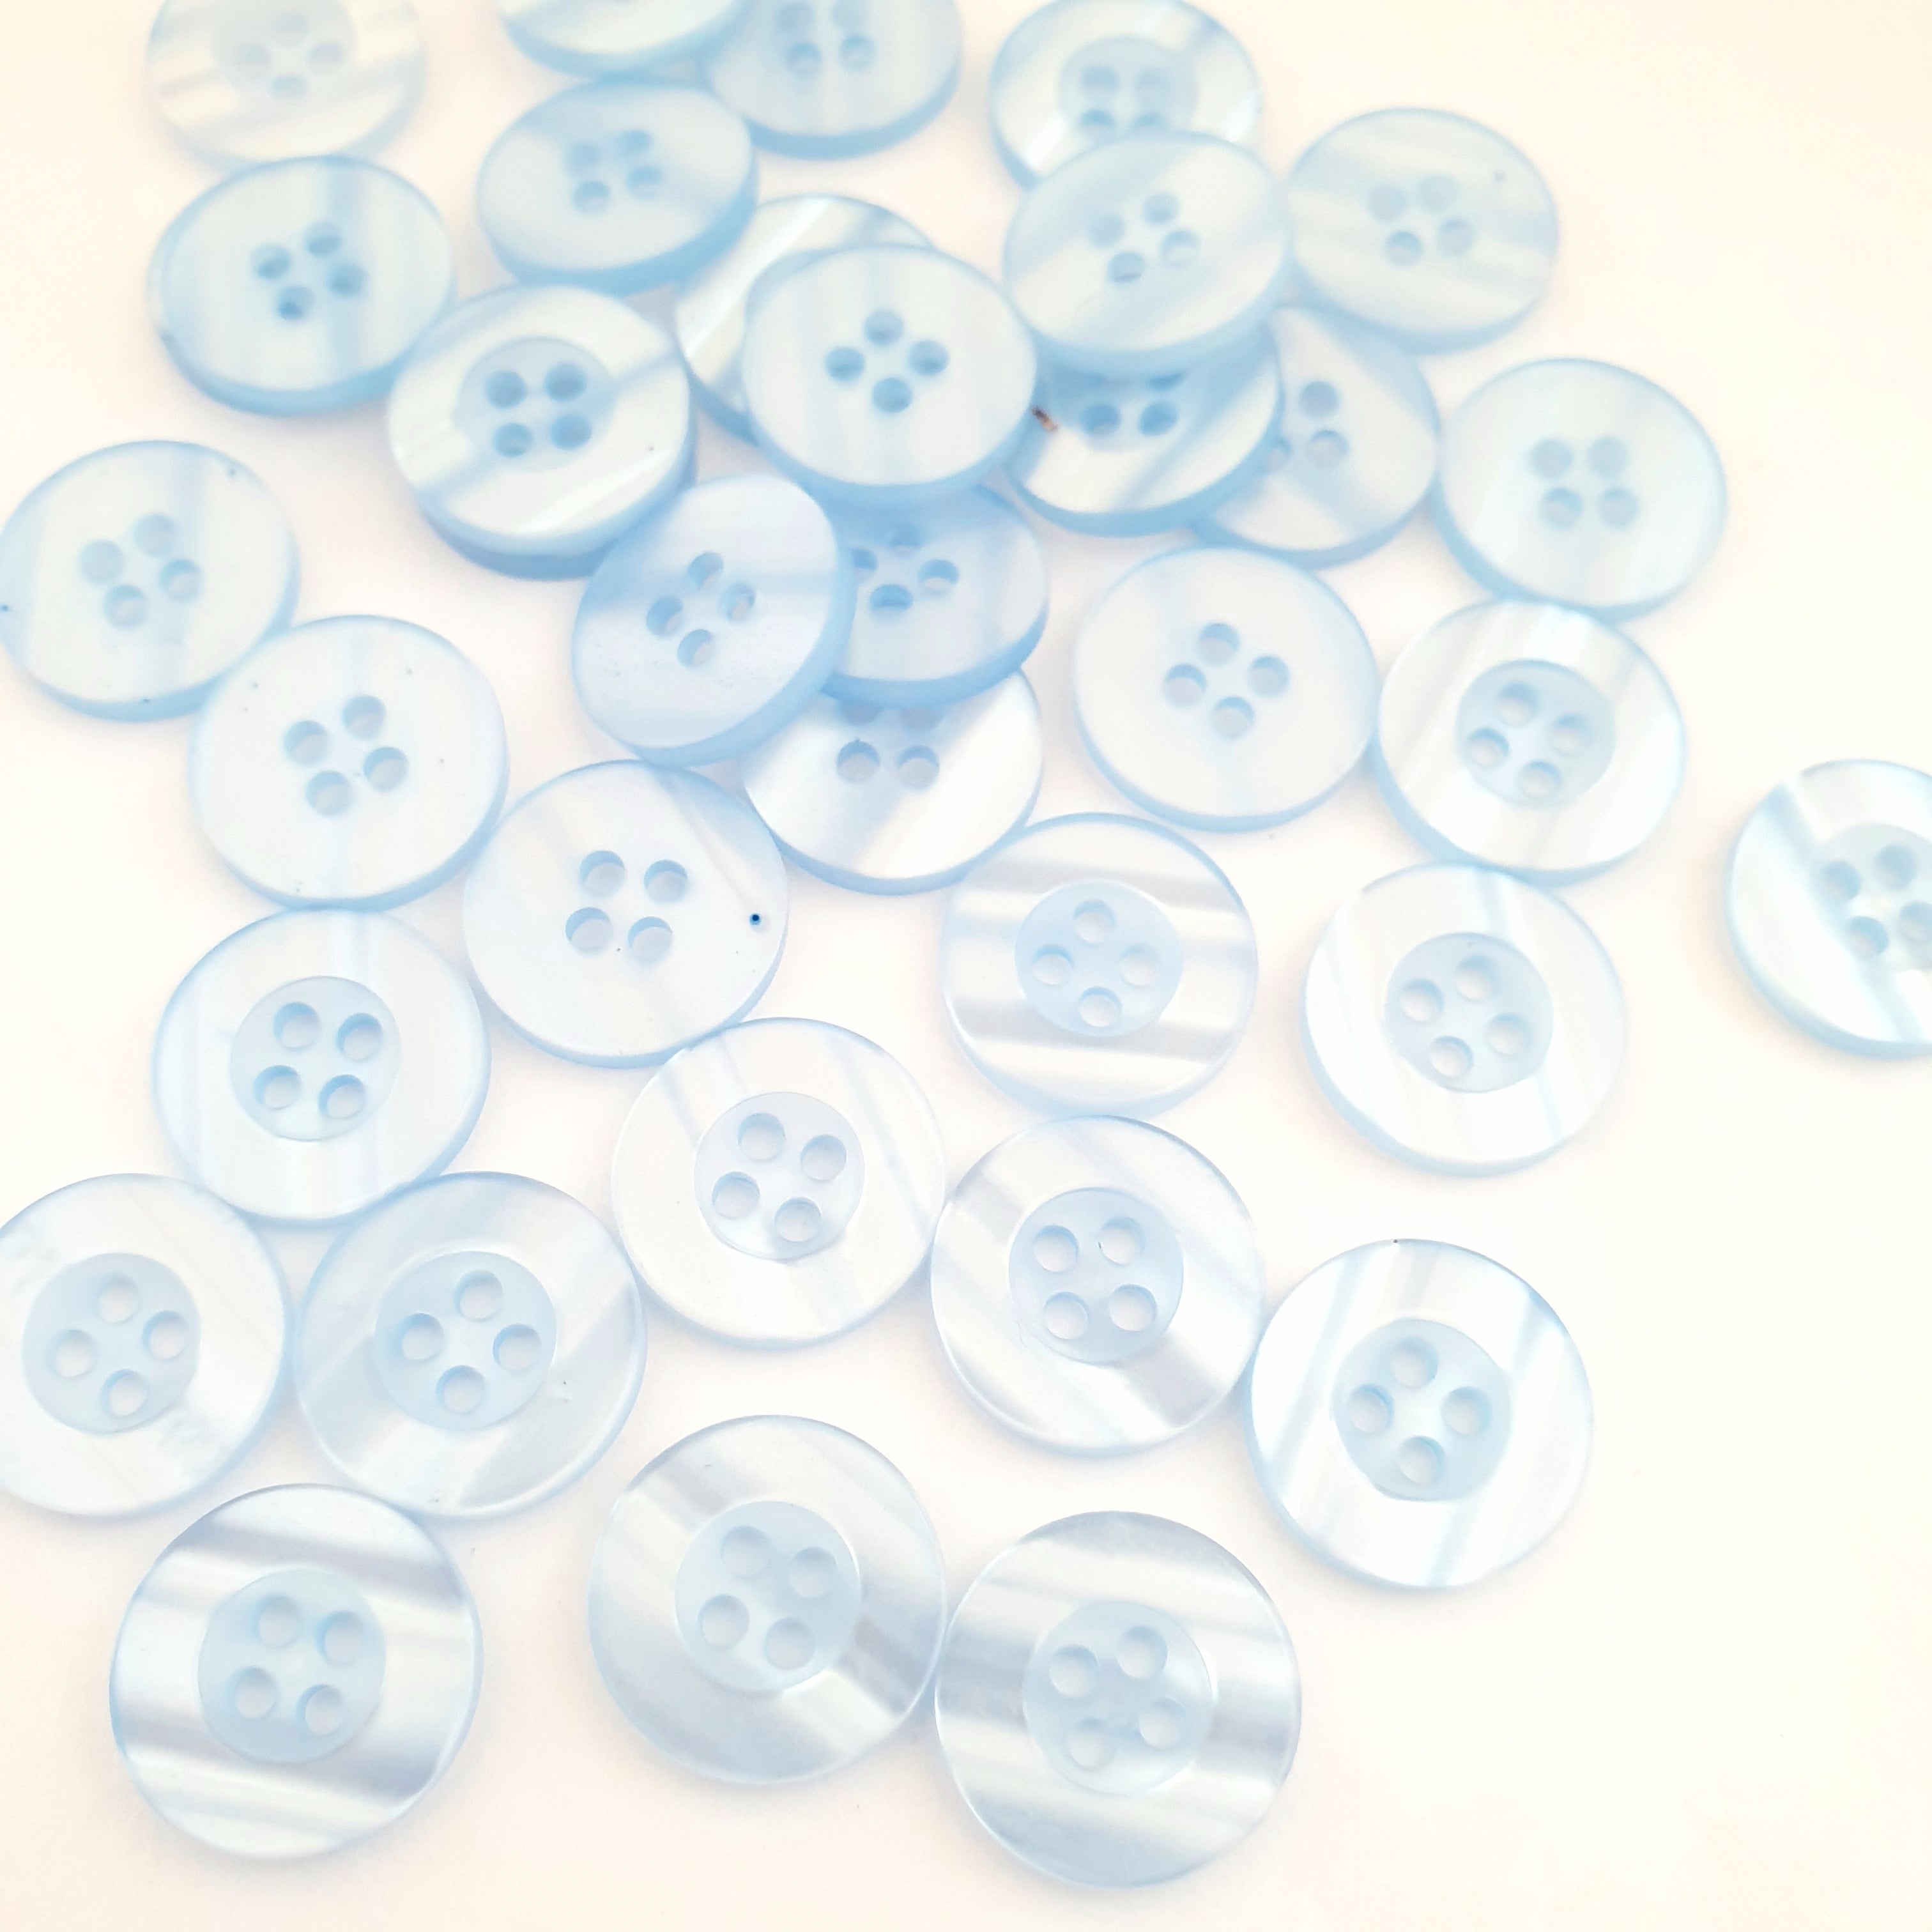 MajorCrafts 50pcs 15mm Baby Blue Pearlescent 4 Holes Round Resin Sewing Buttons